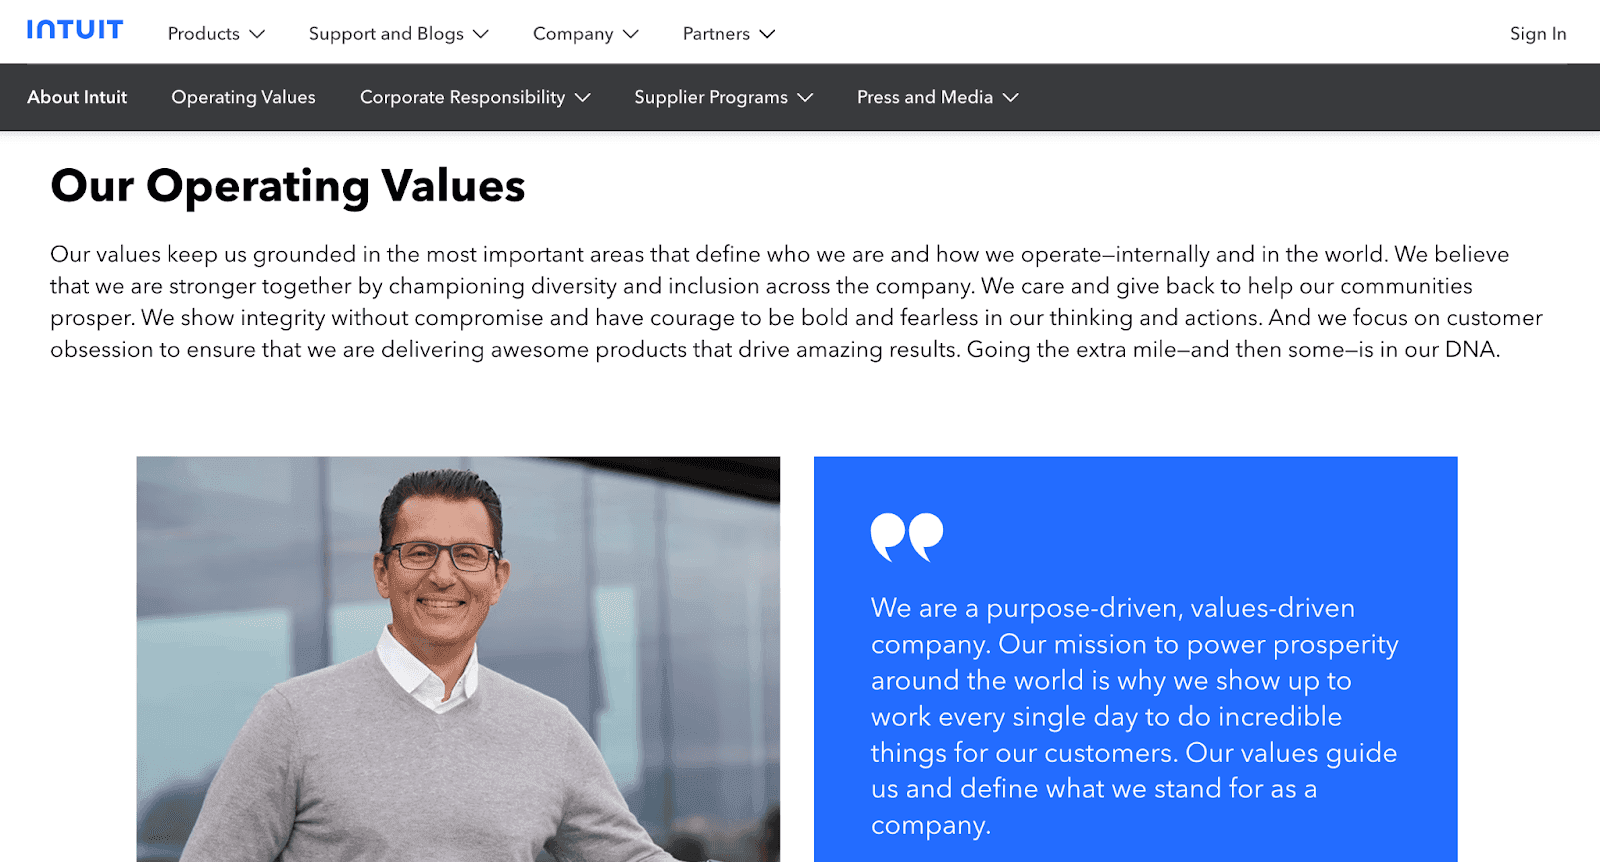 Intuit has a large paragraph written under their page that says Our Operating Values.